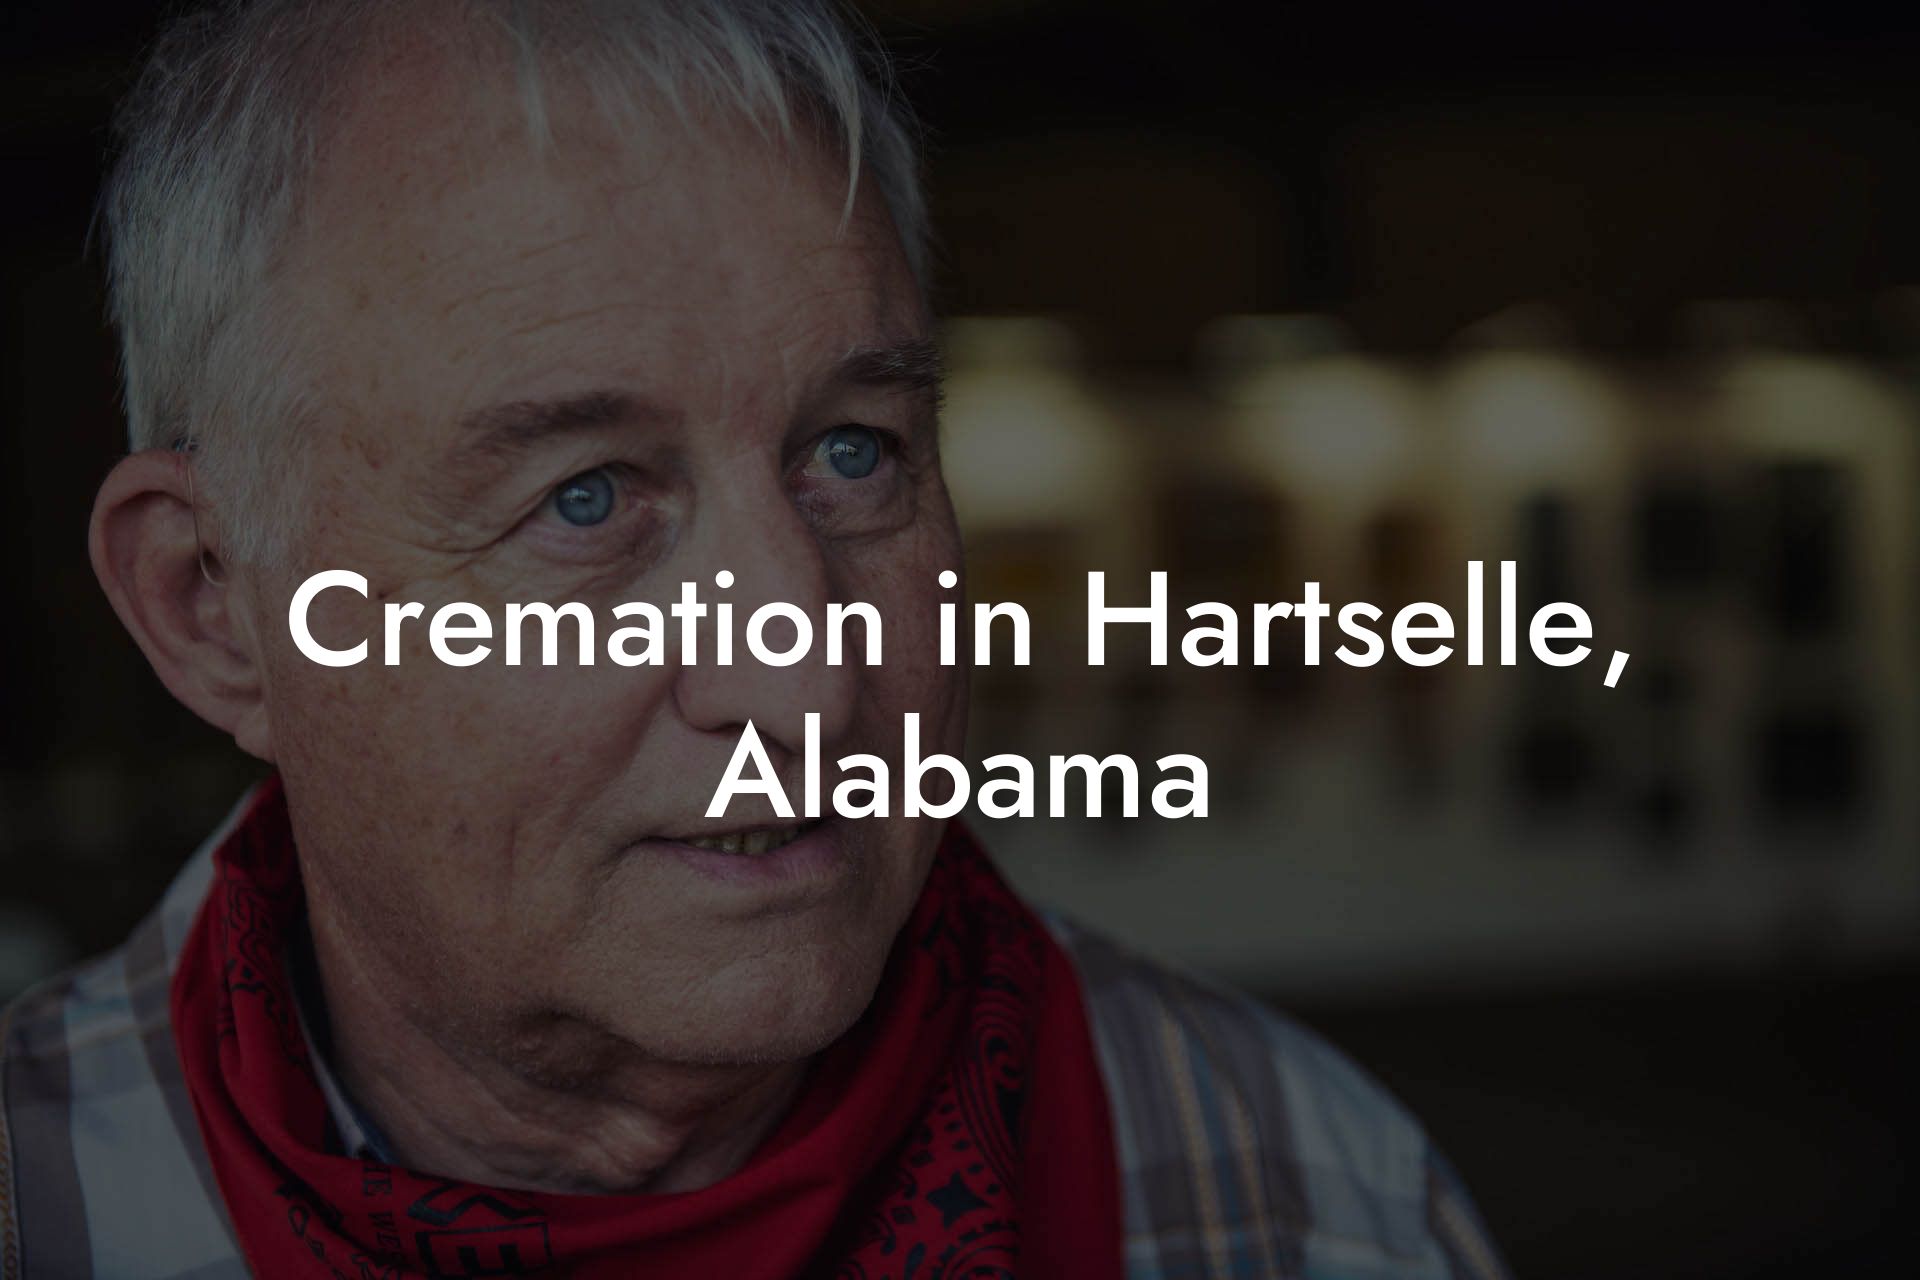 Cremation in Hartselle, Alabama